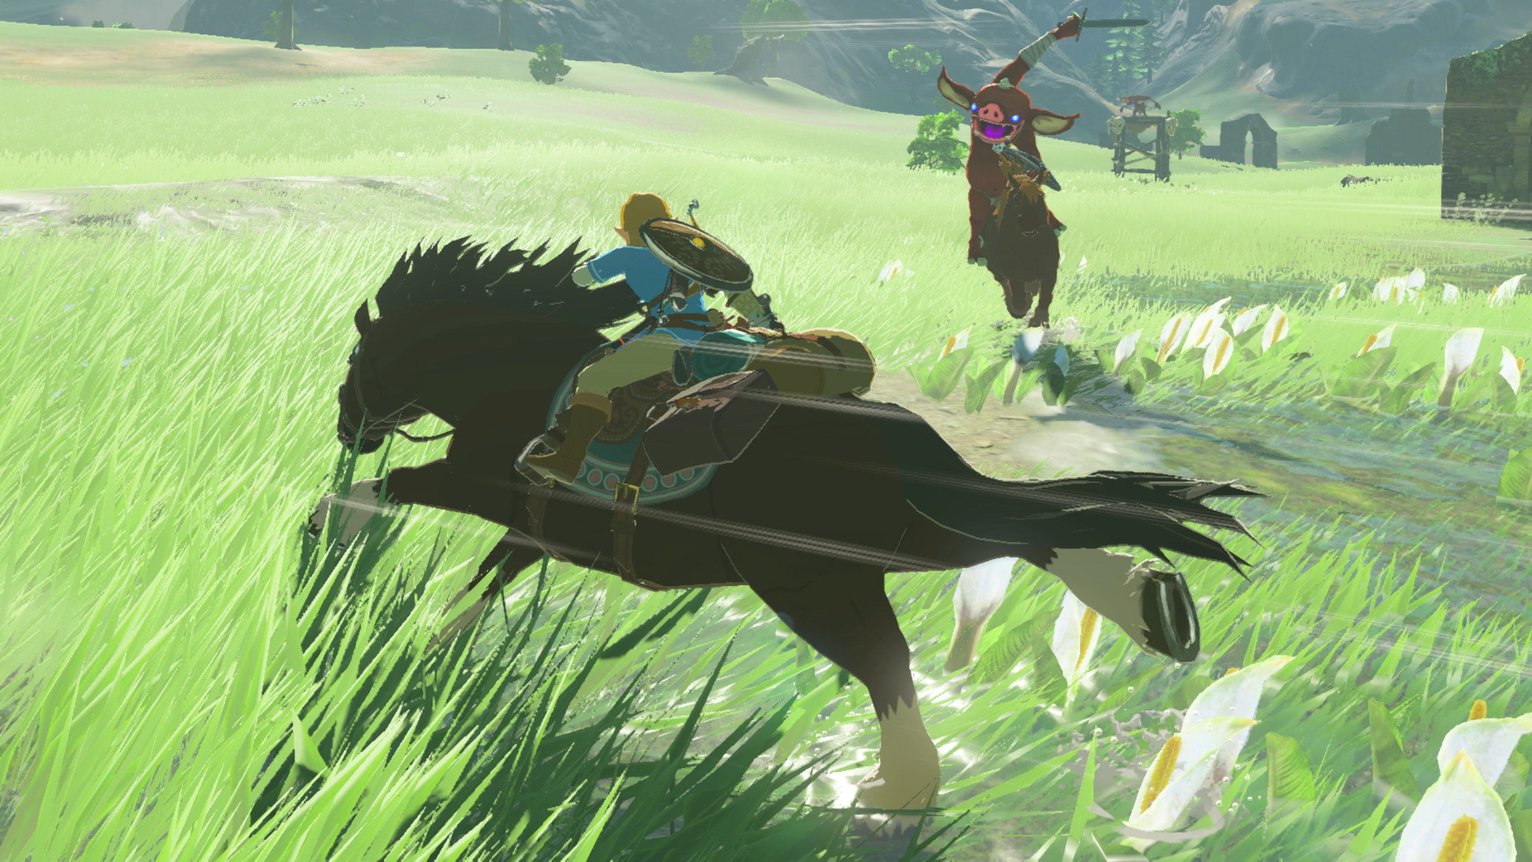 Legend of Zelda: Breath of the Wild Nintendo Switch Game Review